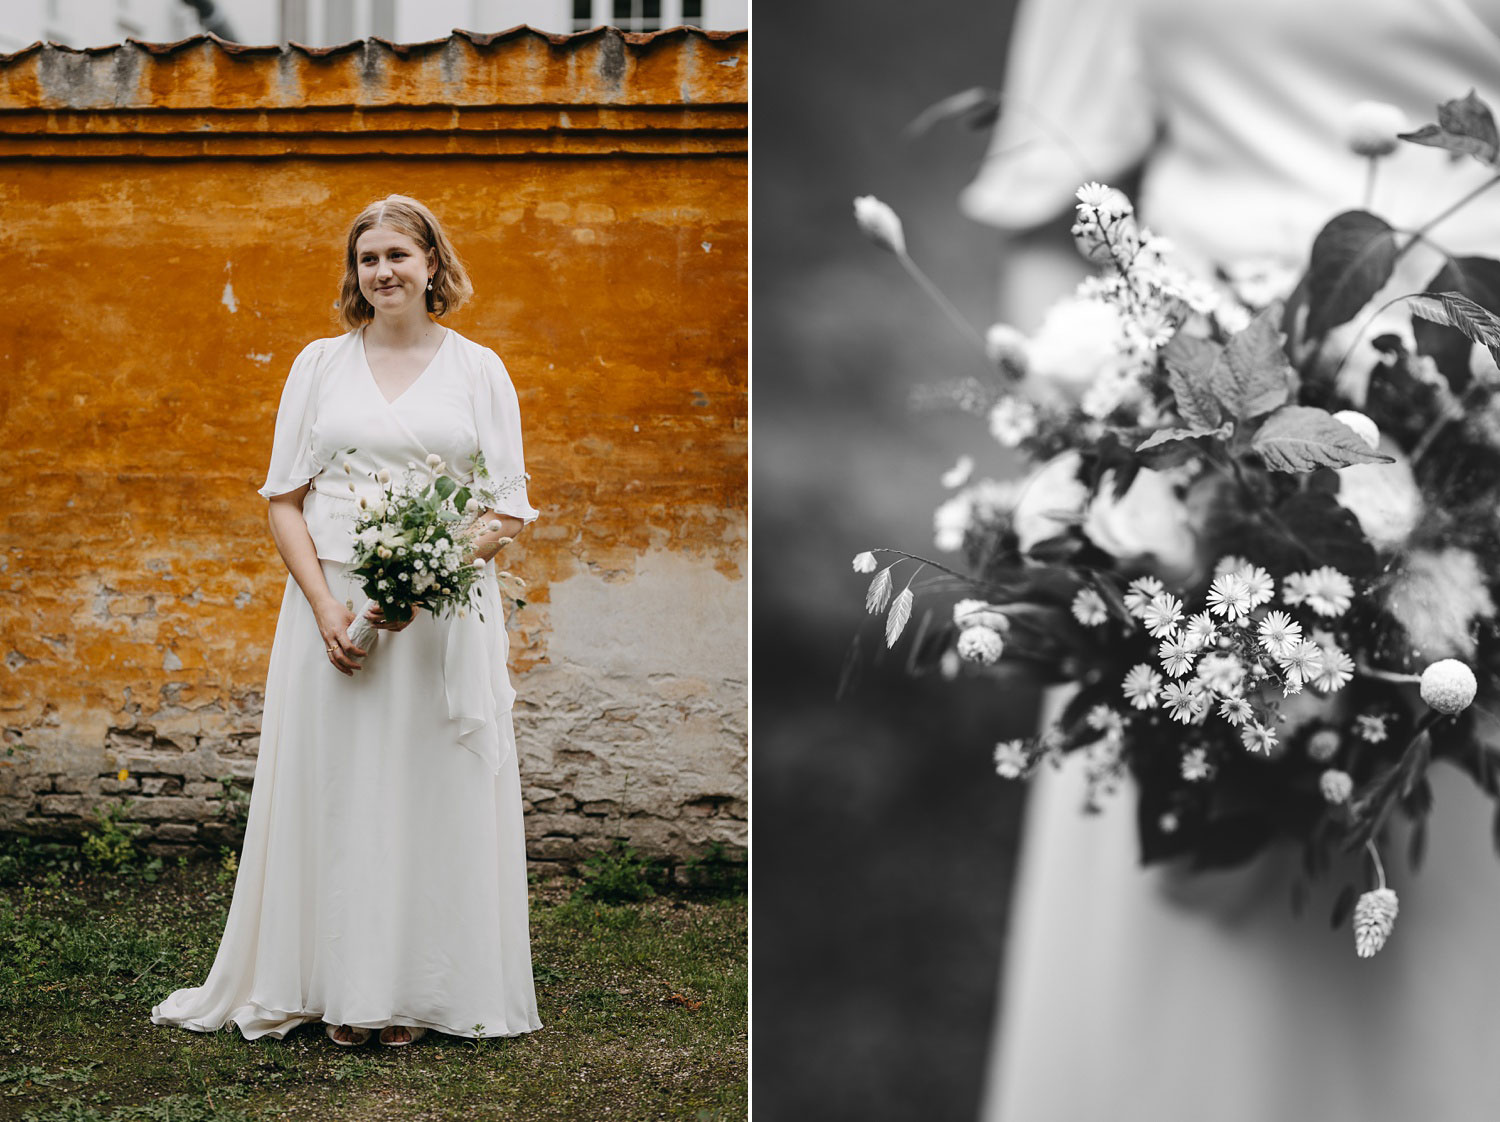 A beautiful bridal bouquet held delicately by the bride at a park in Copenhagen